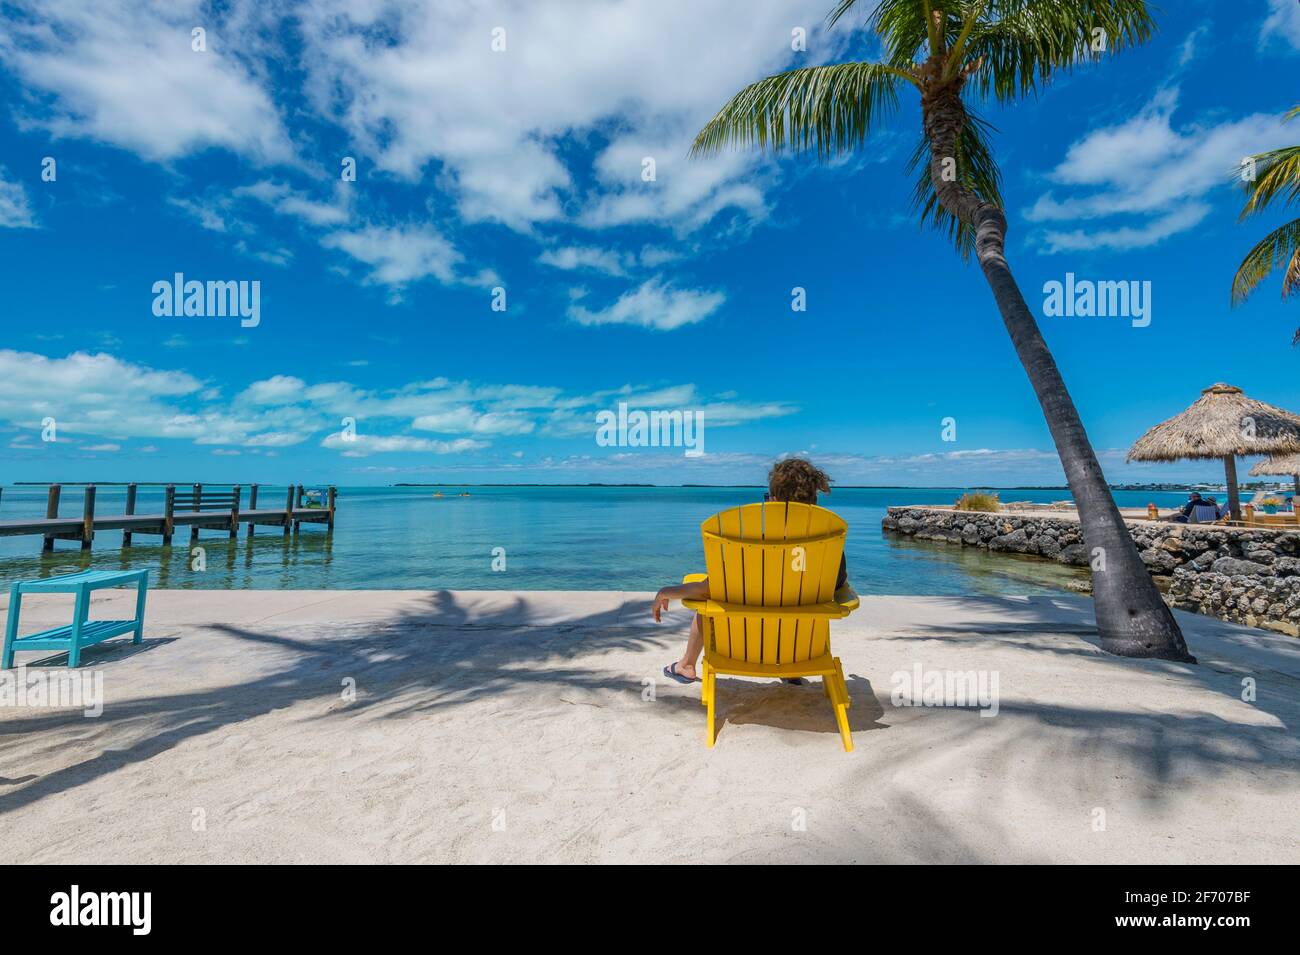 Woman sitting in yellow adirondack chair, staring out contemplatively at Caribbean ocean on incredibly beautiful sunny day. Stock Photo